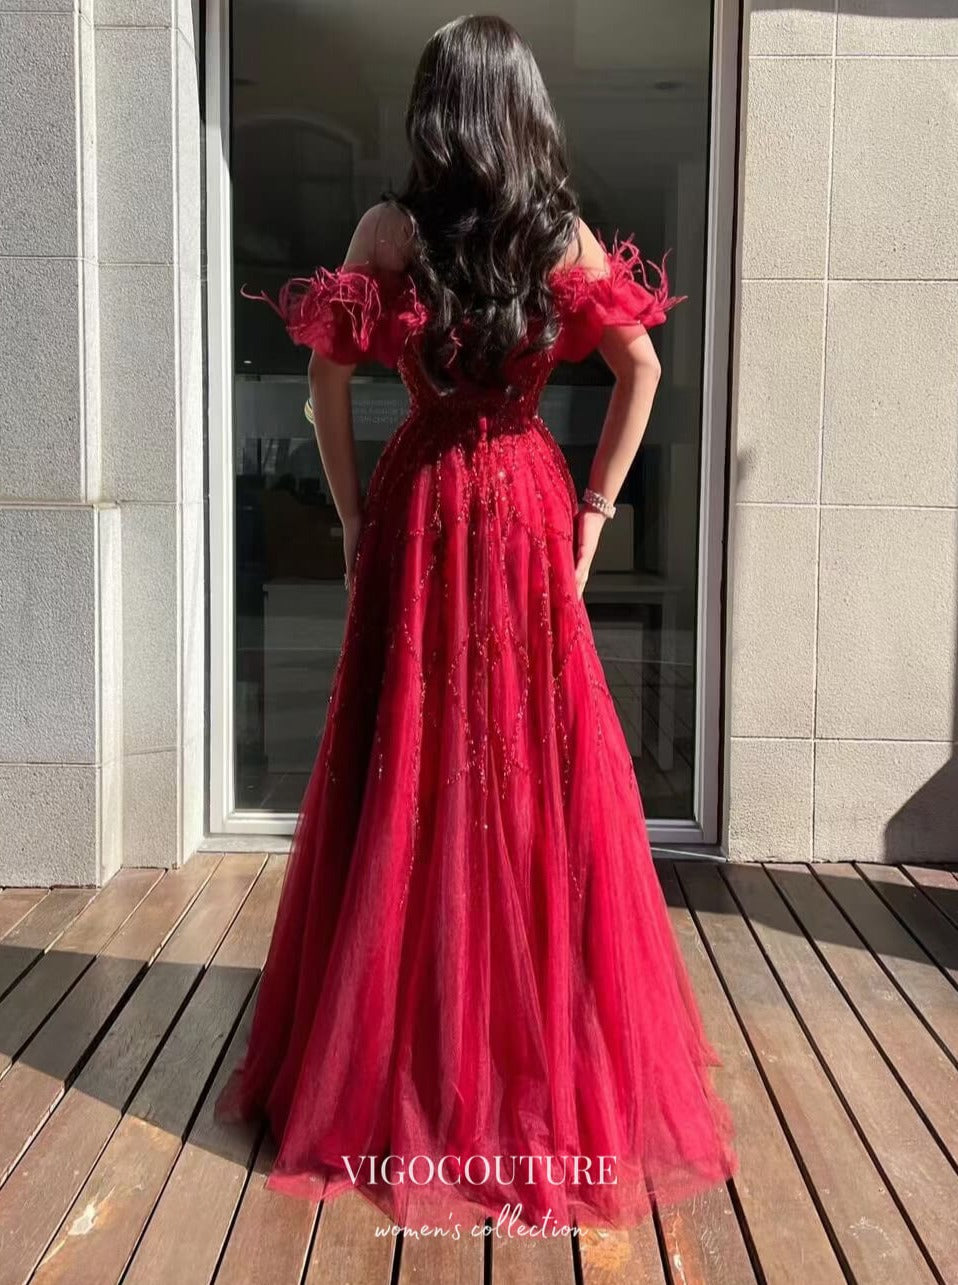 Red Off the Shoulder Beaded Prom Dress with Feathers 22237-Prom Dresses-vigocouture-Red-US2-vigocouture